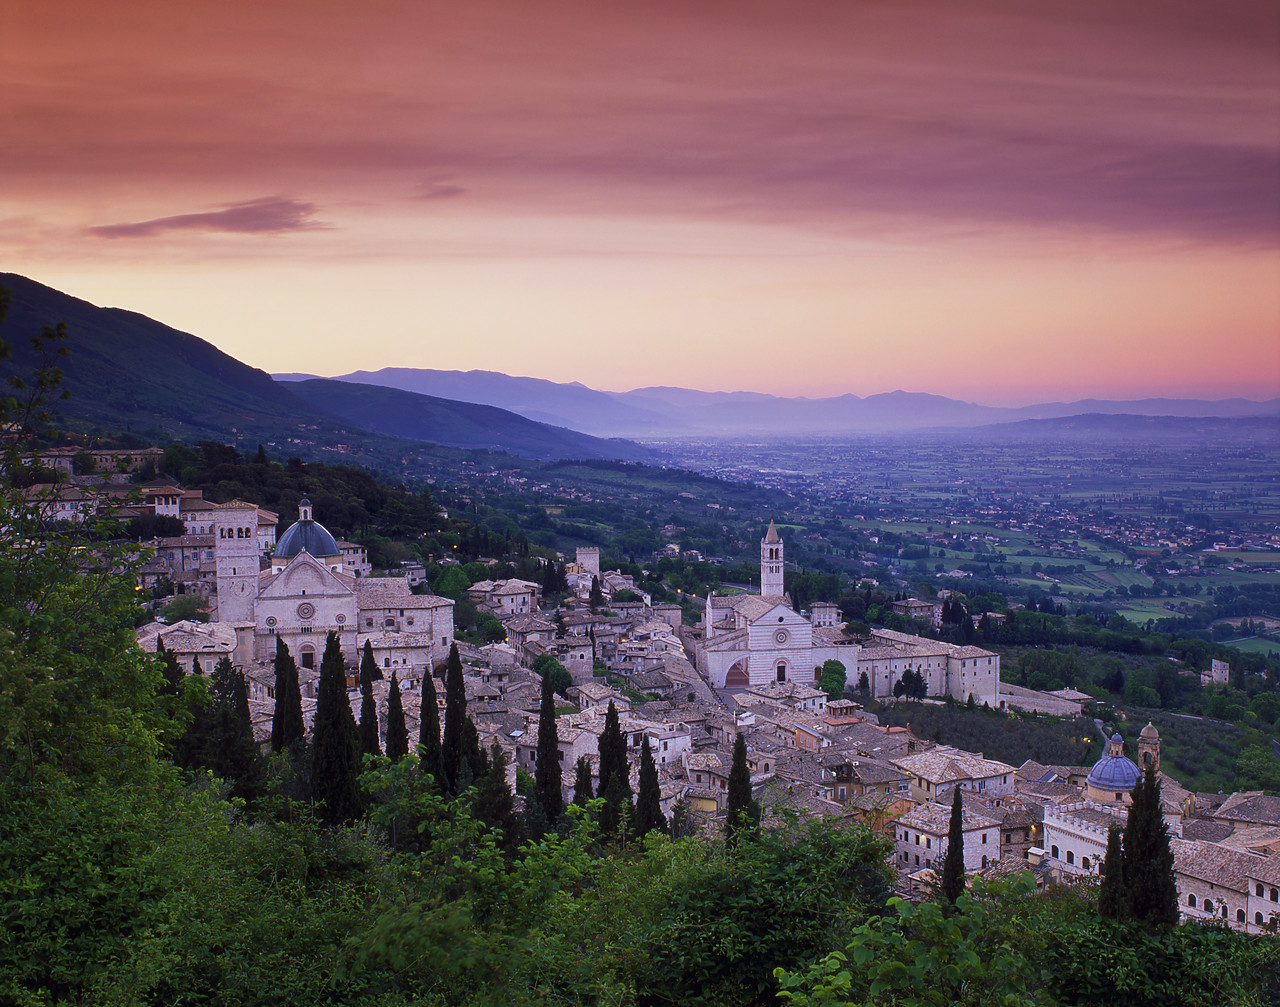 #040096-3 - View over Assisi, Umbria, Italy